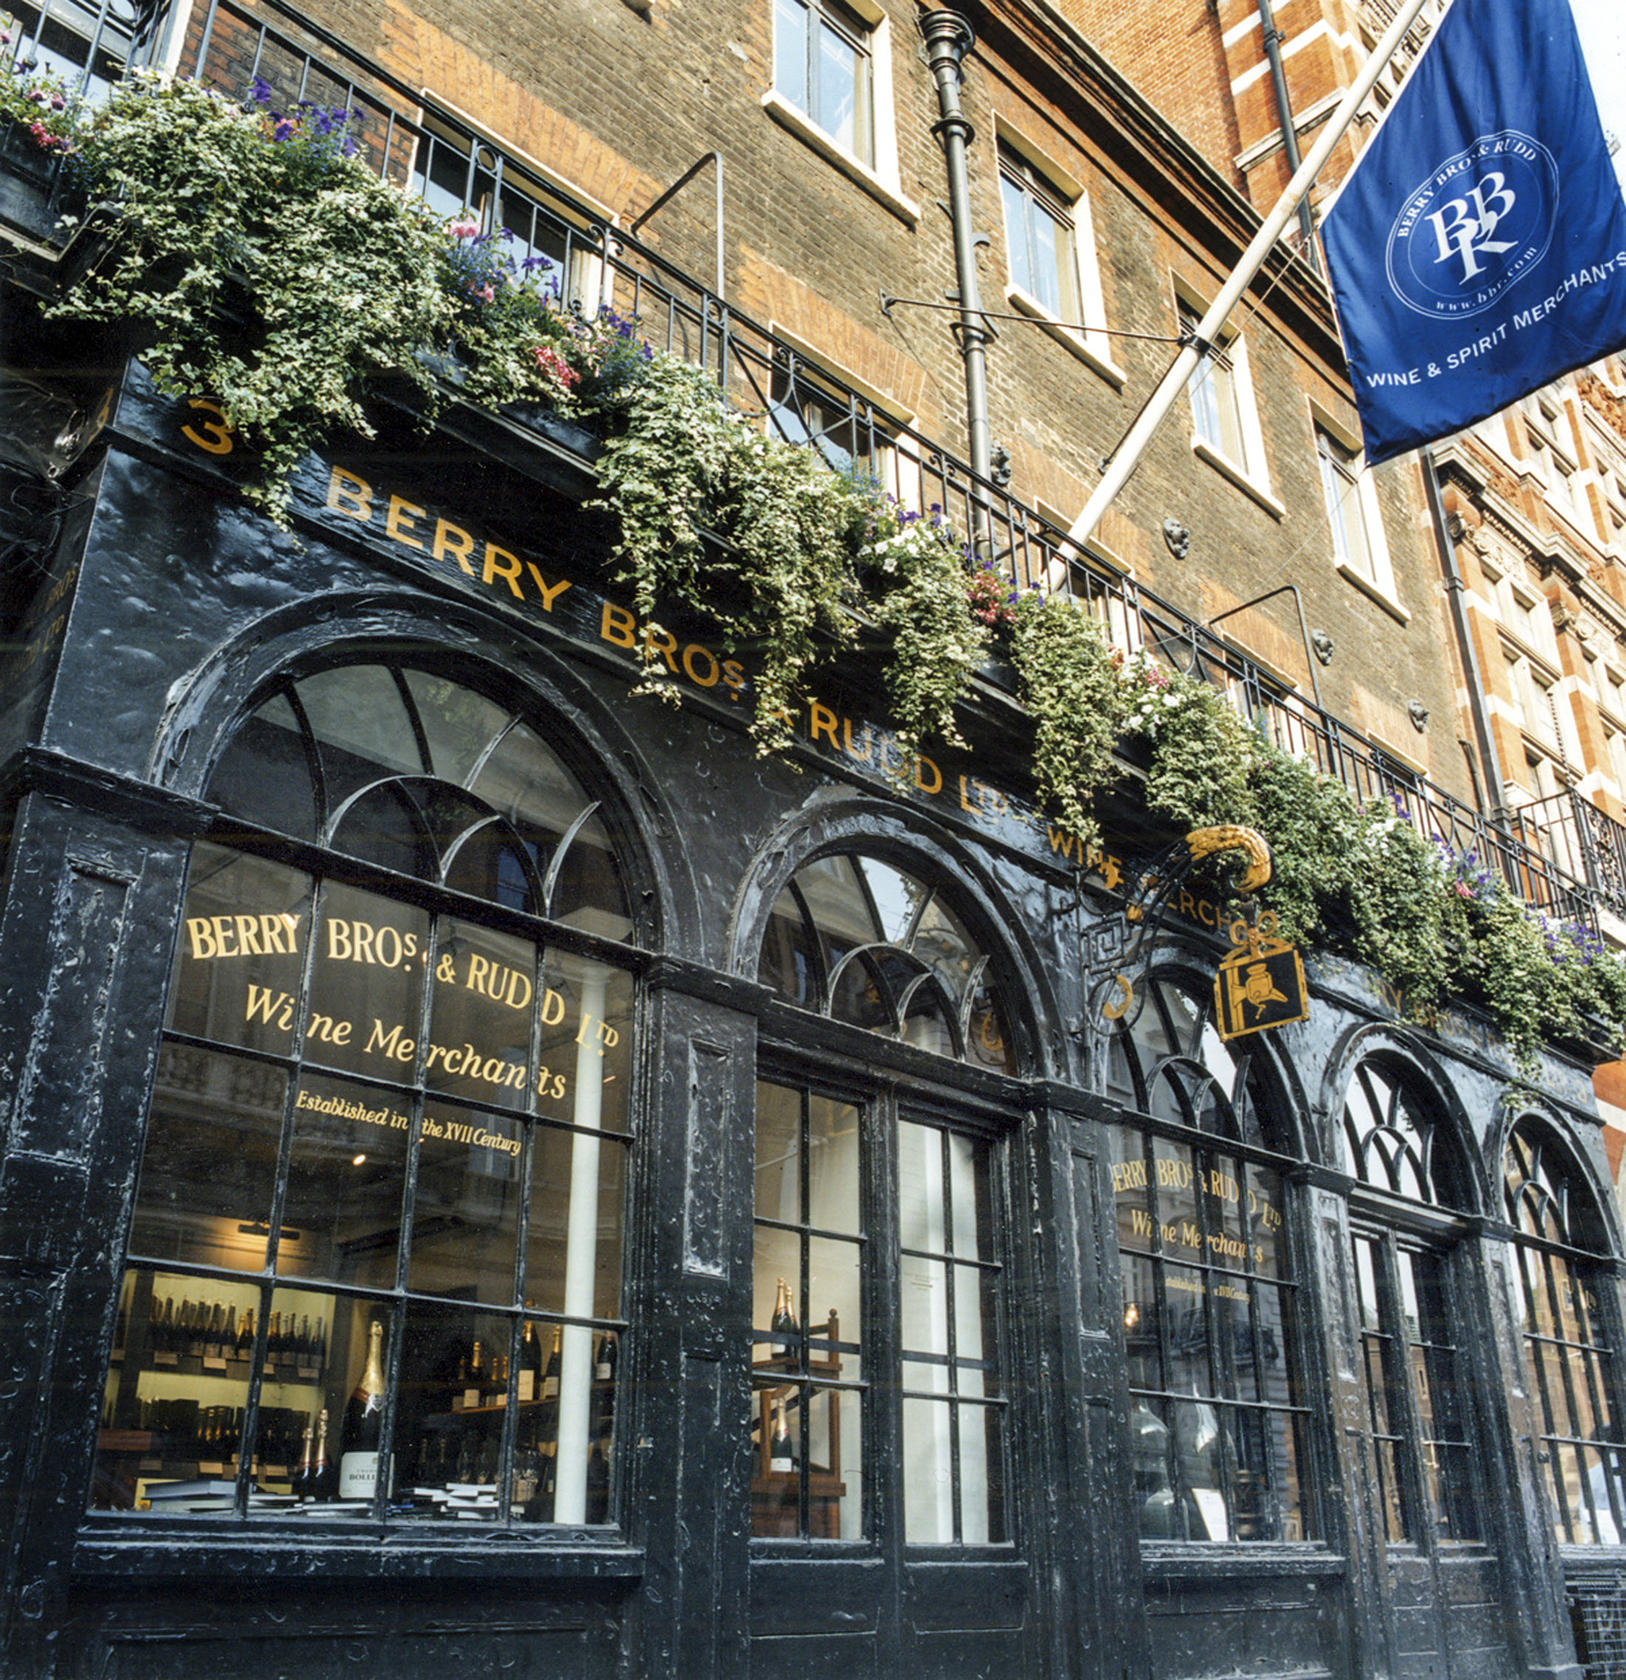 Berry Bros & Rudd was opened in London in 1698. Photo: AFP